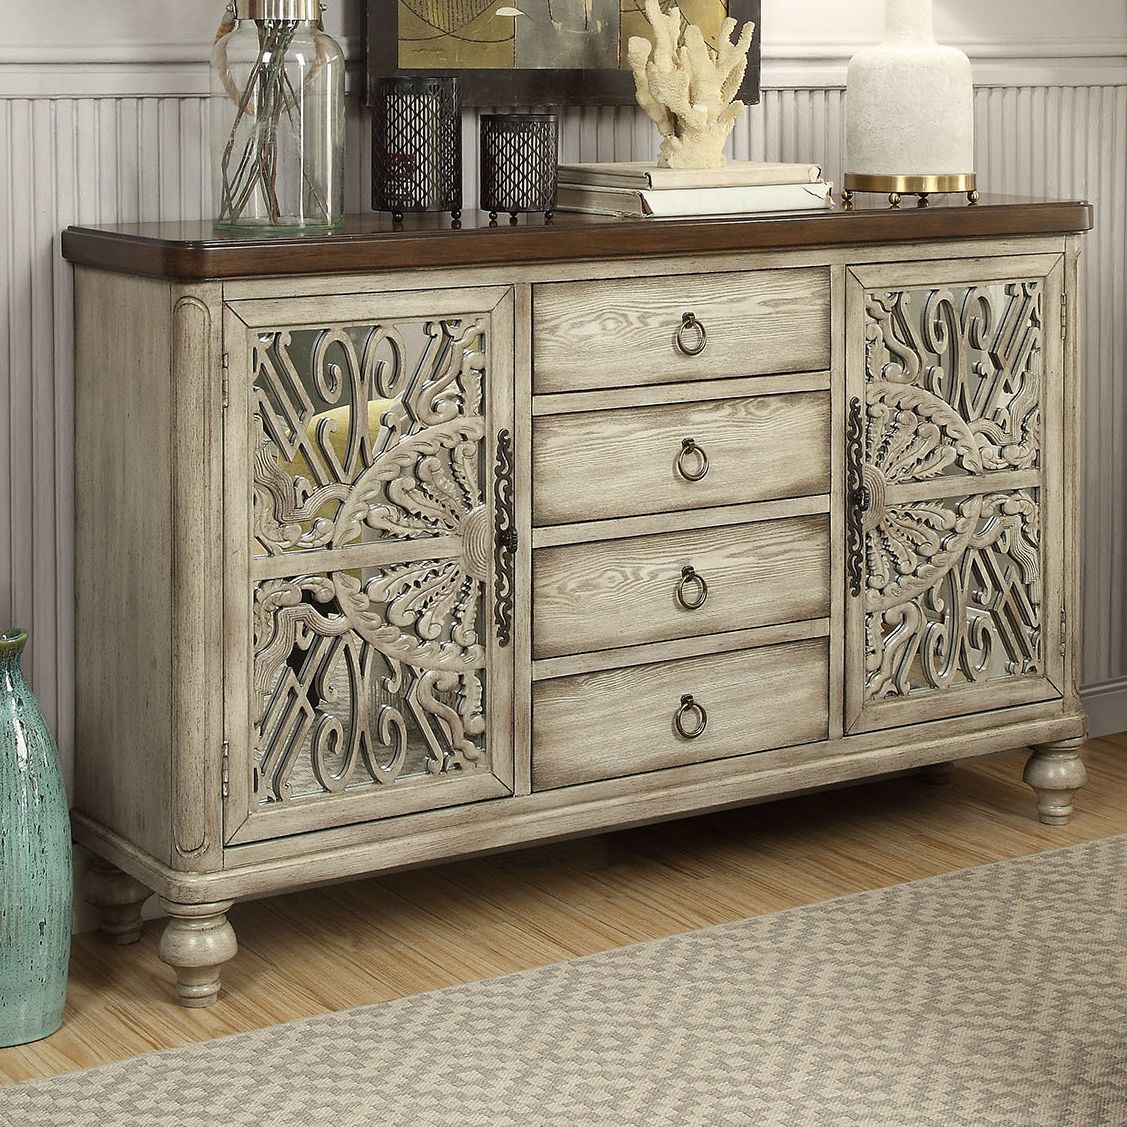 Widely Used Dillen Sideboard With Alkmene Sideboards (View 13 of 20)